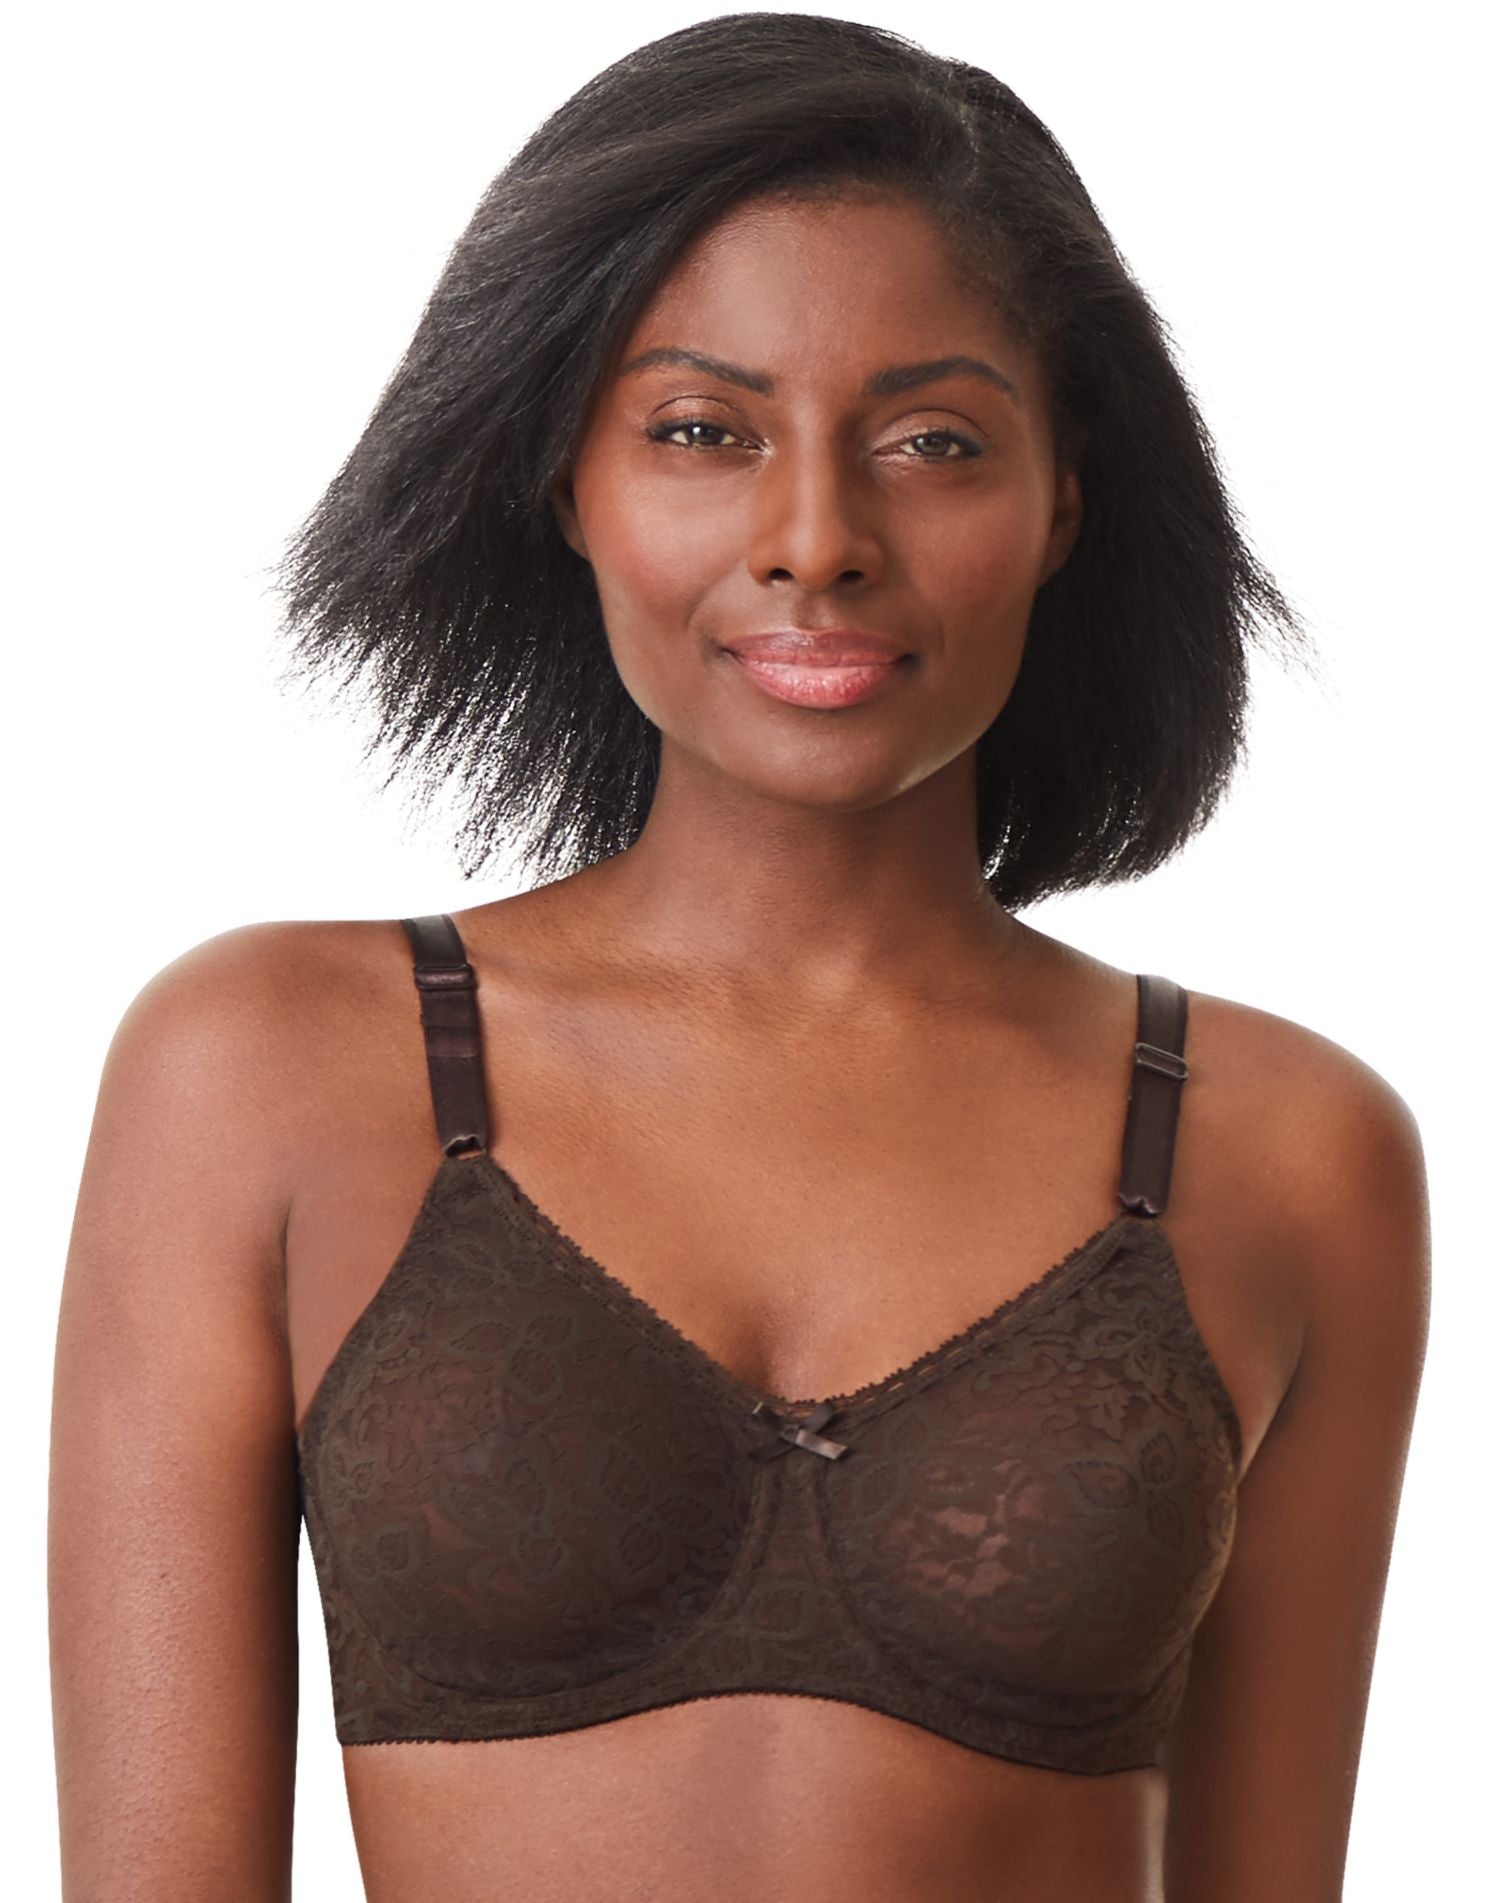 Women's Lace 'N Smooth Stretch Lace Underwire Bra DF3432